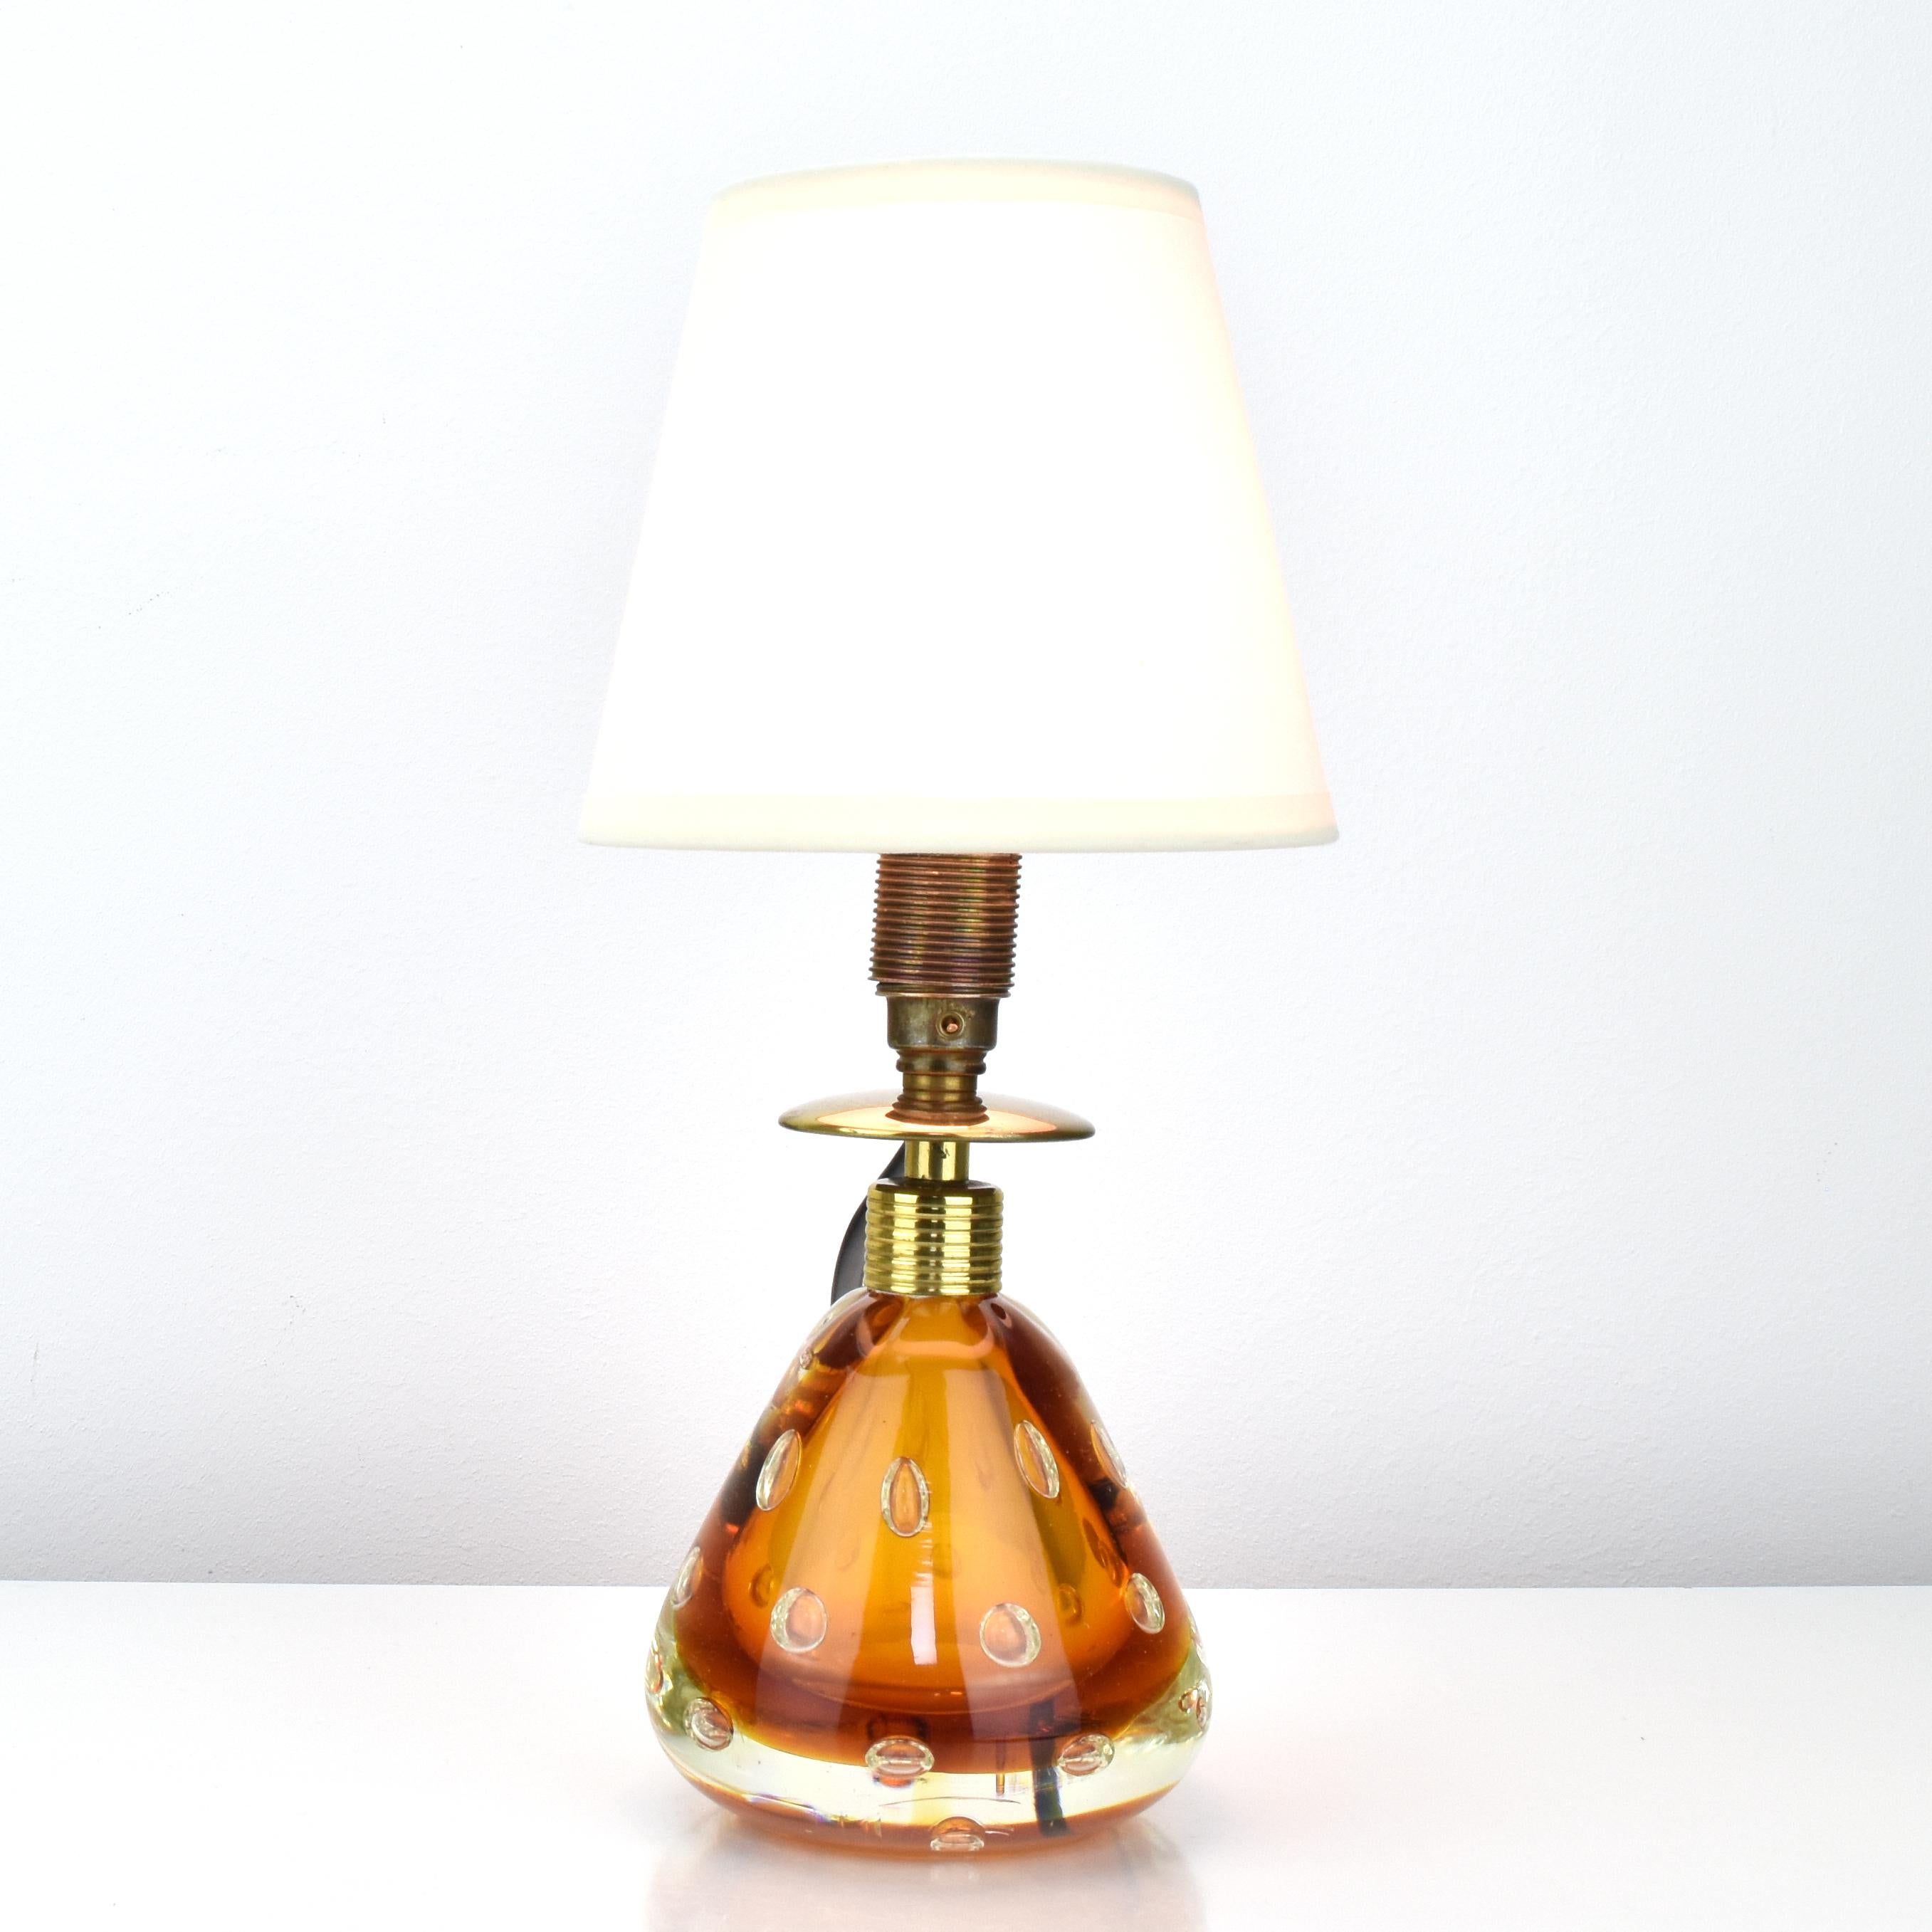 Mid-Century Modern Pietro Toso for Fratelli Toso Murano Sommerso Amber Art Glass Table Lamp 1950s For Sale